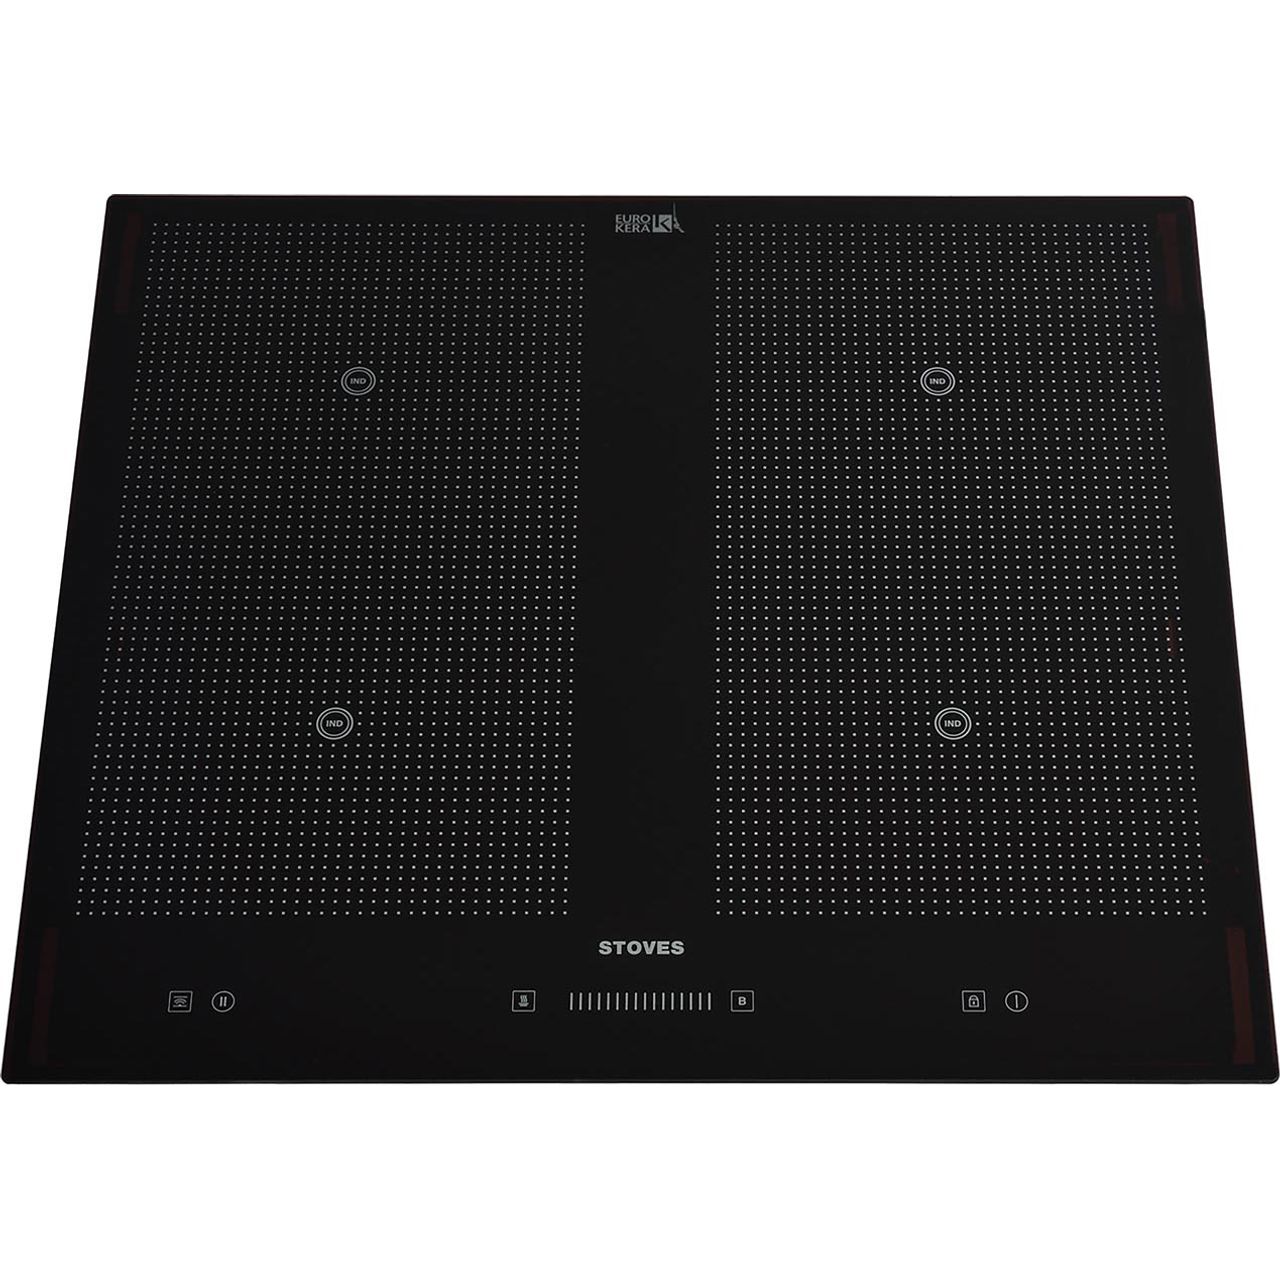 Stoves BHIT601 59cm Induction Hob Review